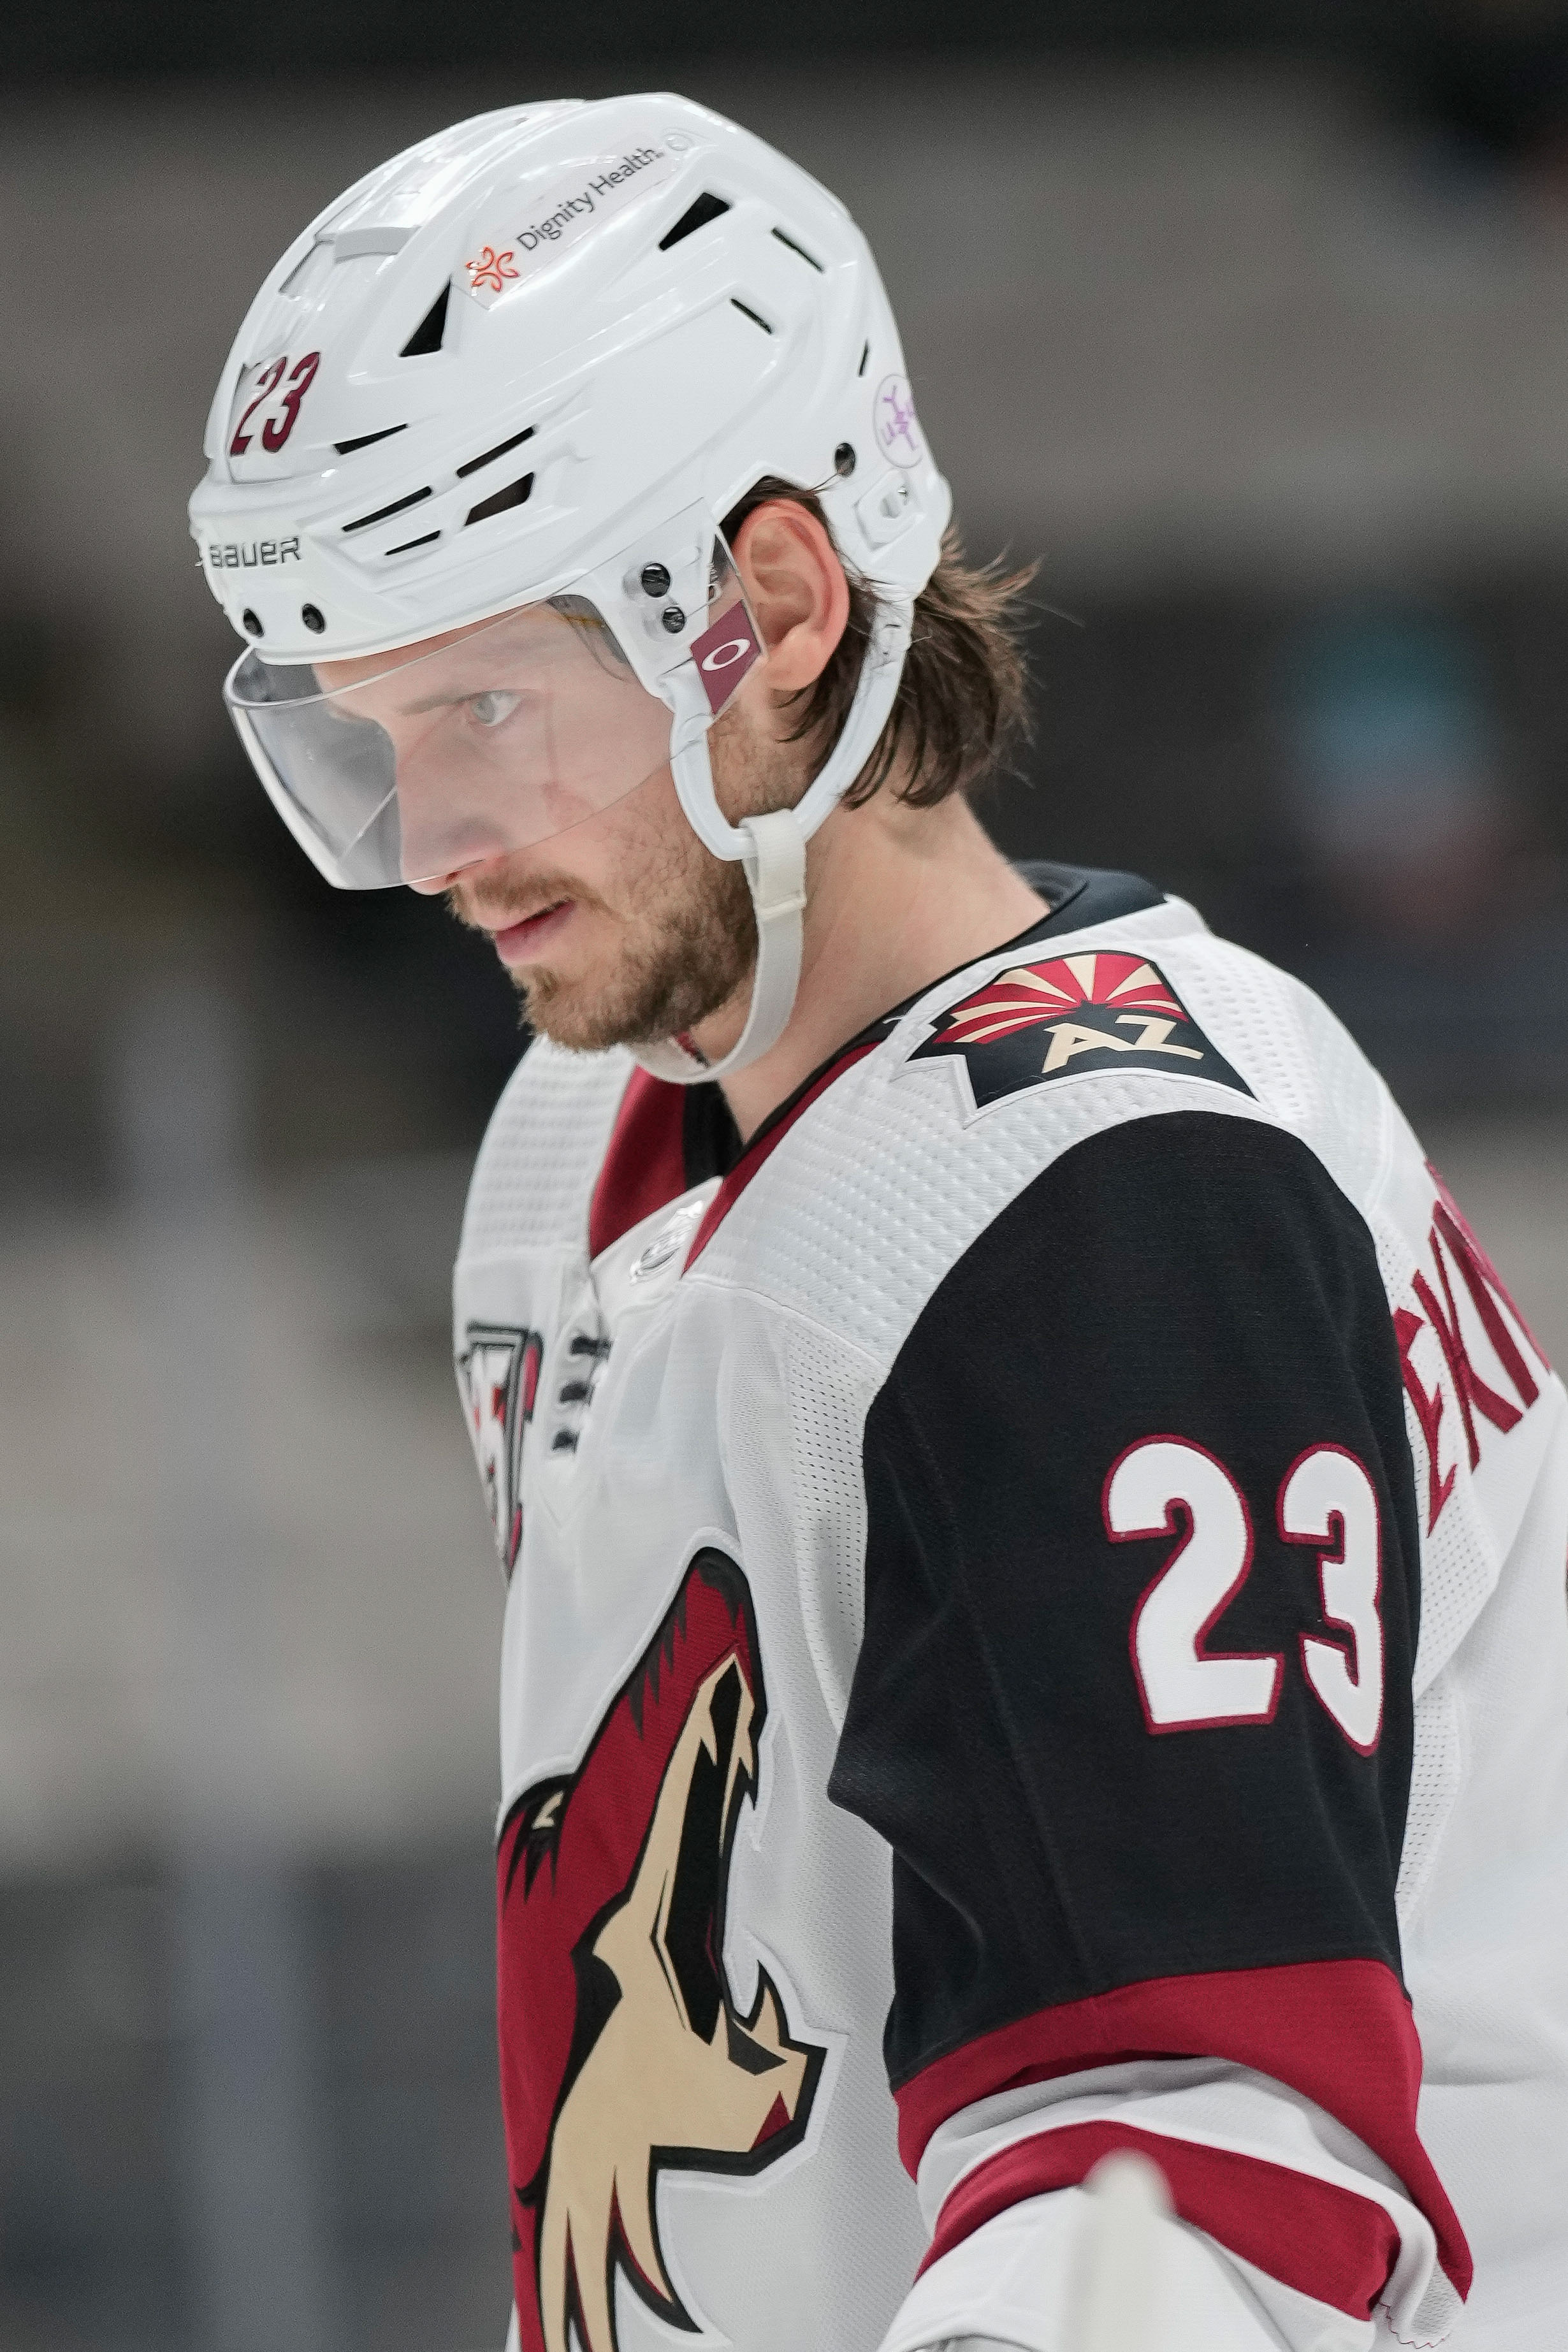 Ekman Larsson - Oliver Ekman Larsson Granted Leave From Coyotes / .larsson and oliver ekman larsson while they get a massage and naprapath treatment before a signing update.